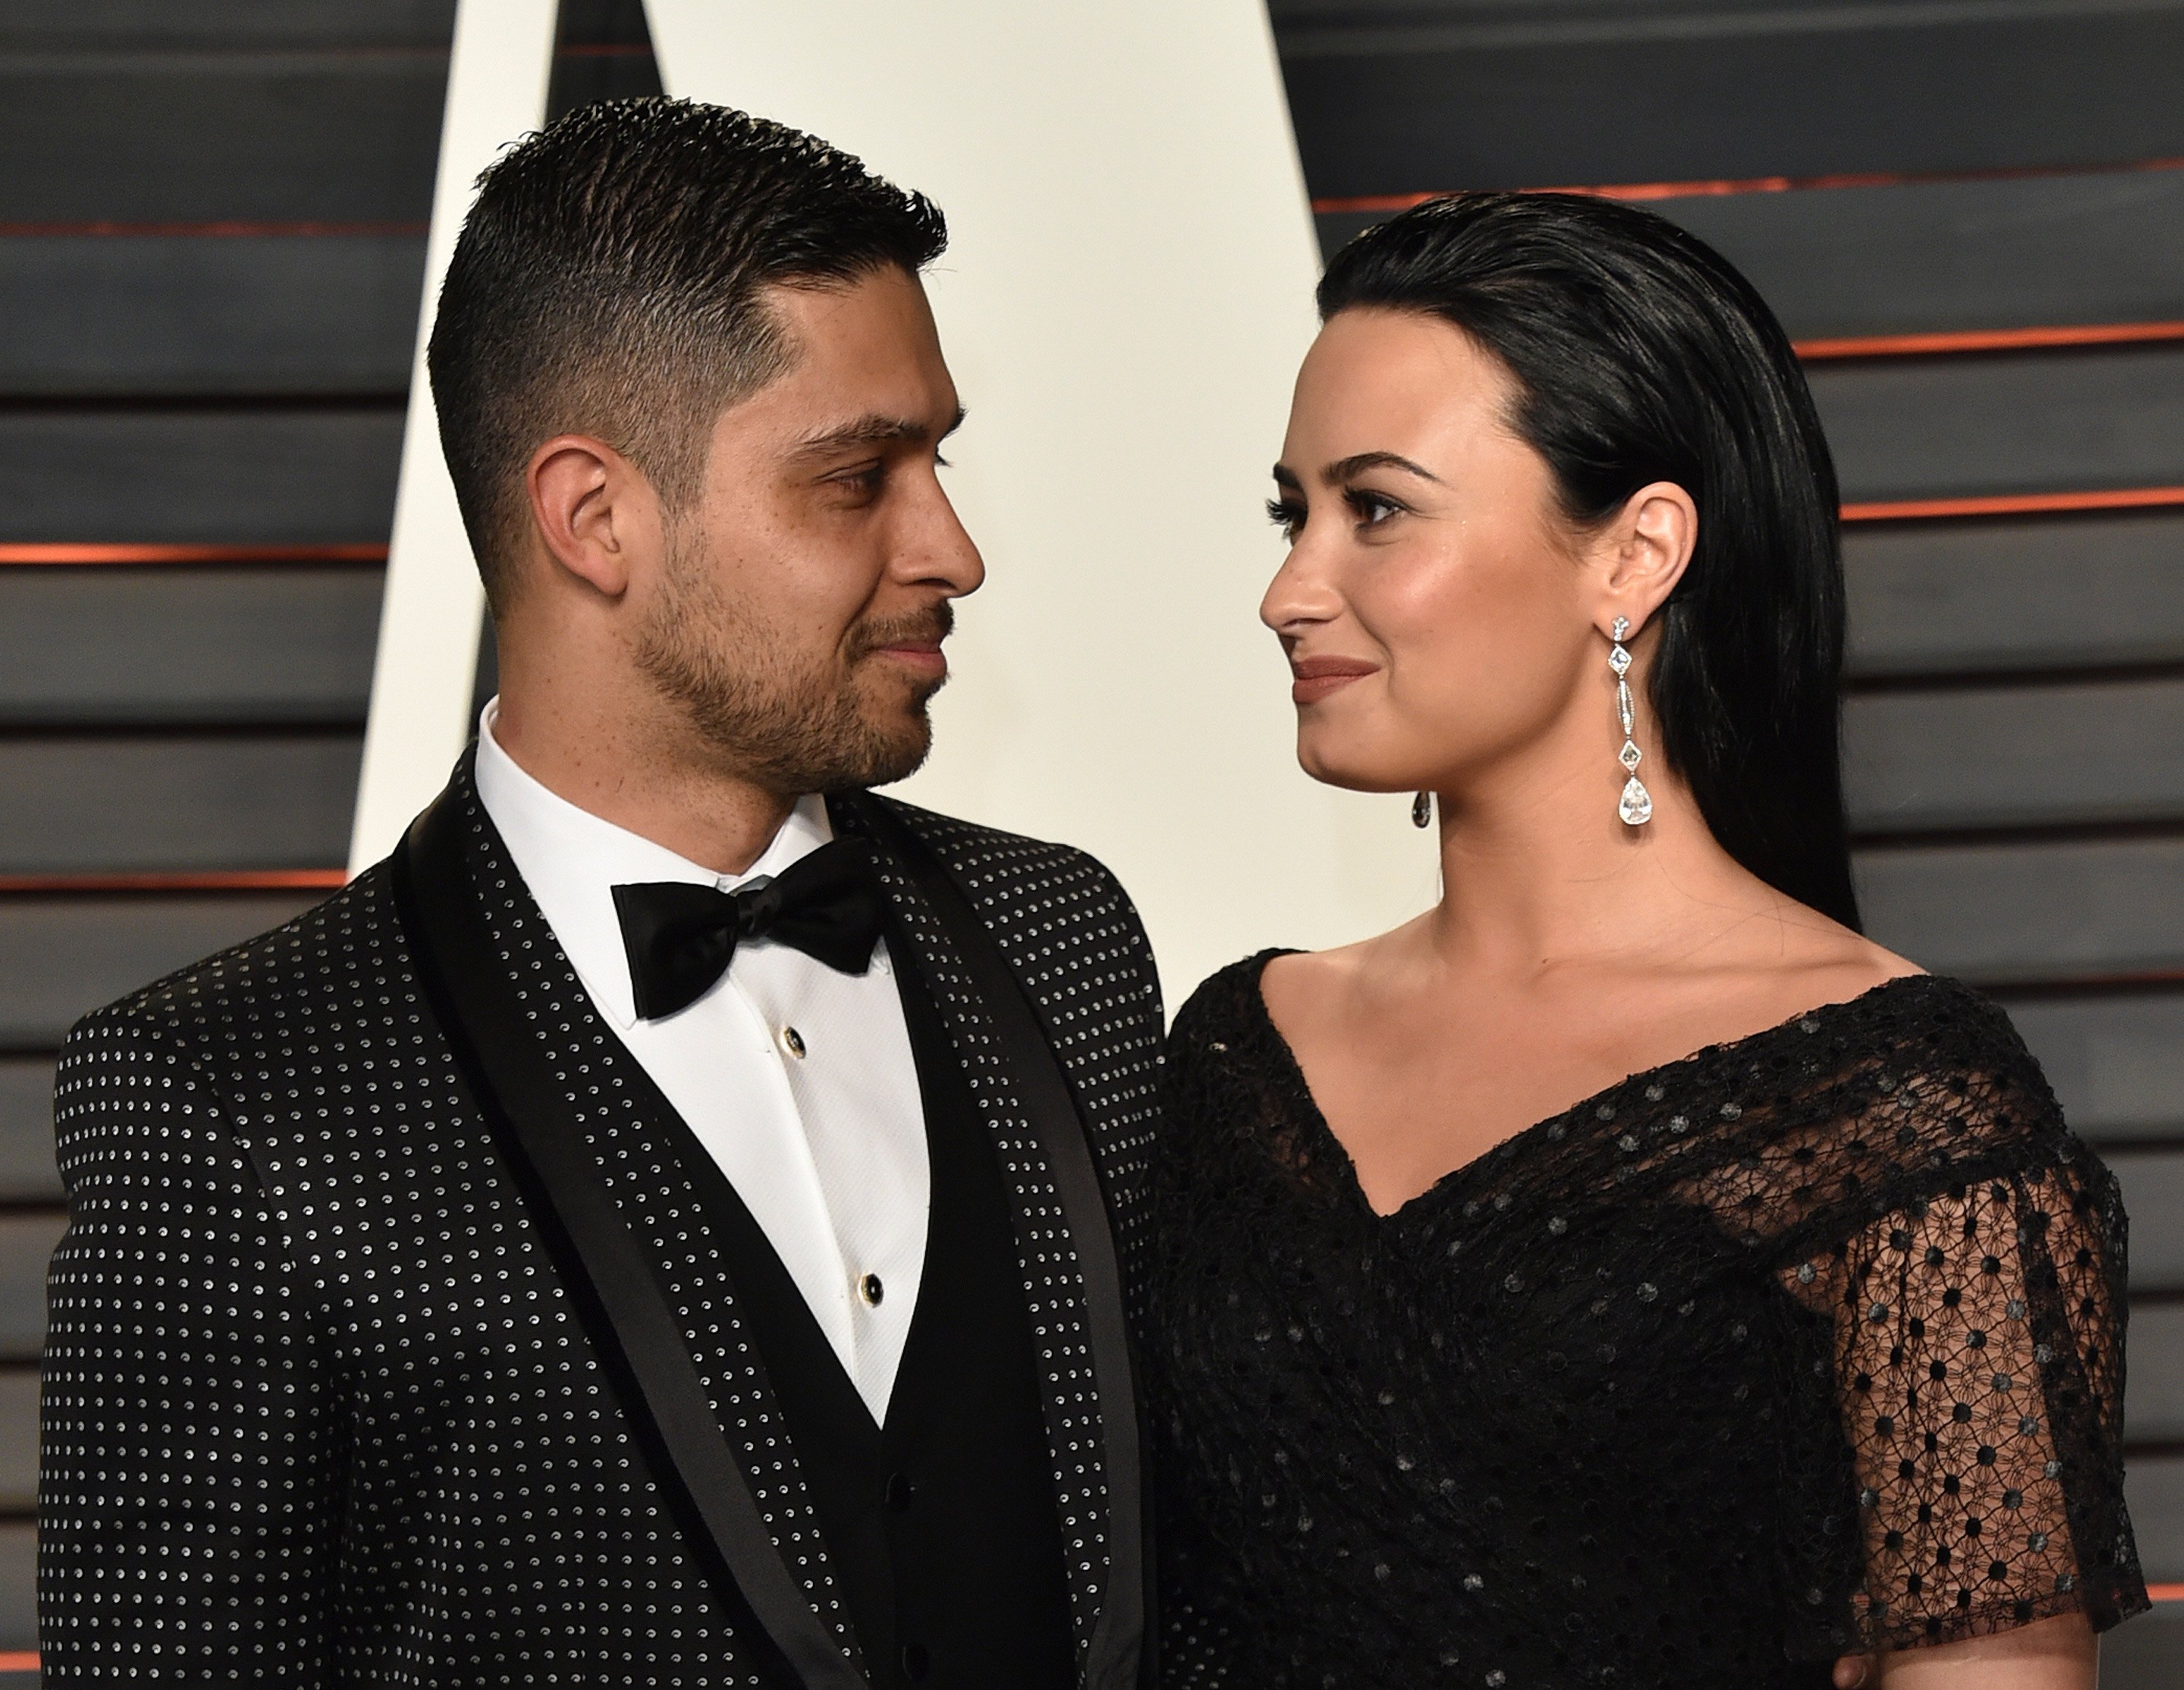 Actor Wilmer Valderrama (L) and singer Demi Lovato arrive at the 2016 Vanity Fair Oscar Party Hosted By Graydon Carter at Wallis Annenberg Center for the Performing Arts on February 28, 2016 in Beverly Hills, California. 